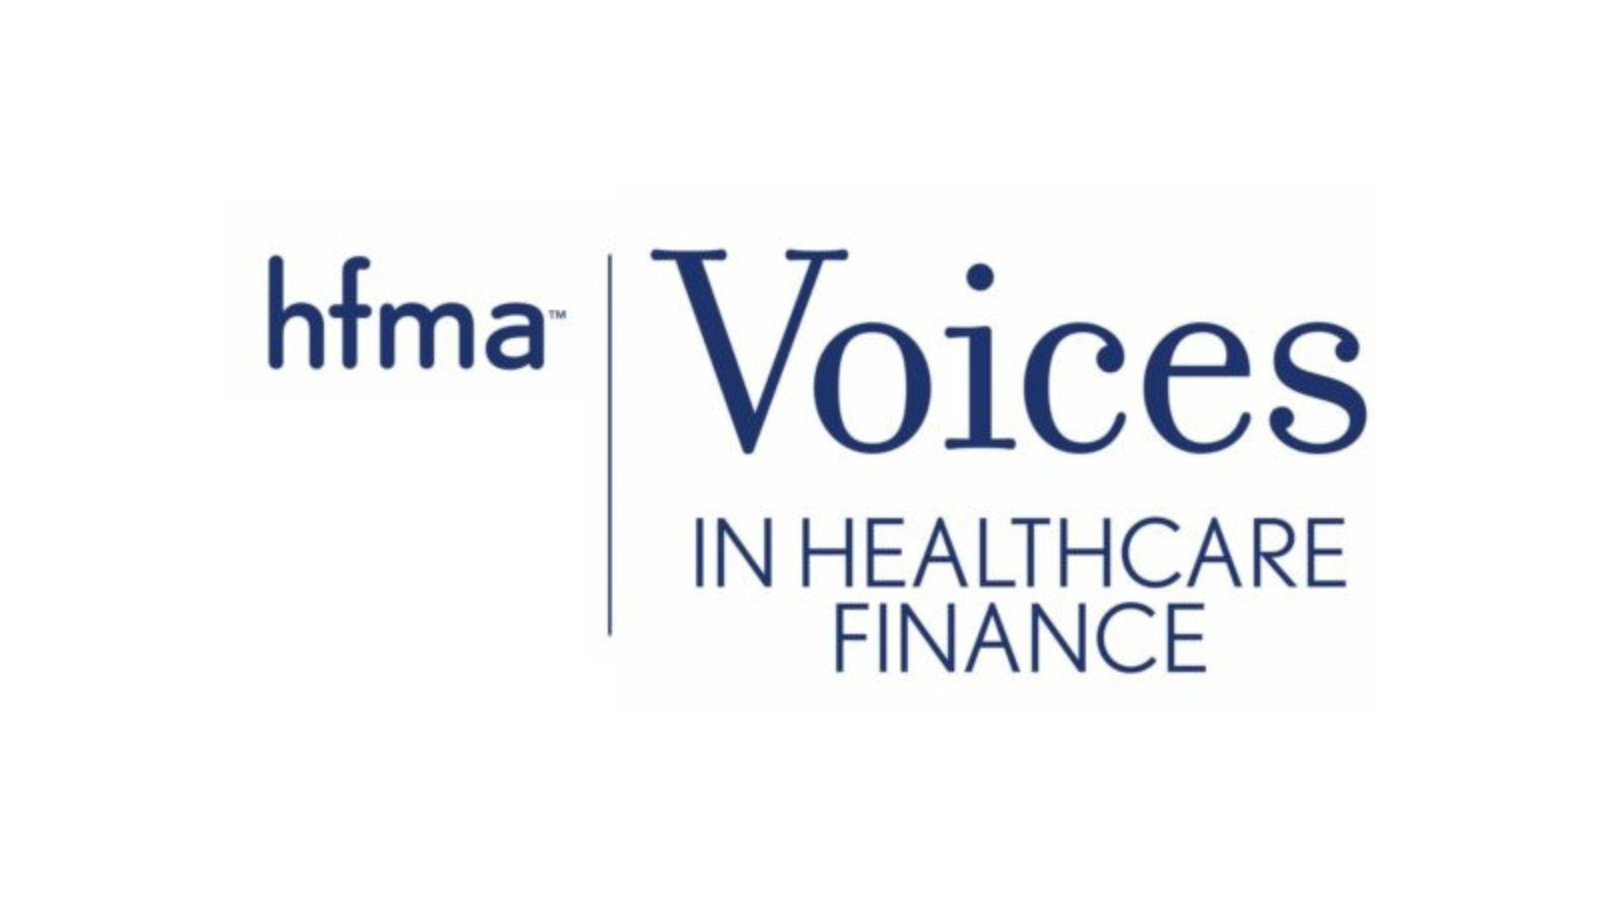 HFMA Voices in Healthcare Finance Podcast Above and beyond in the